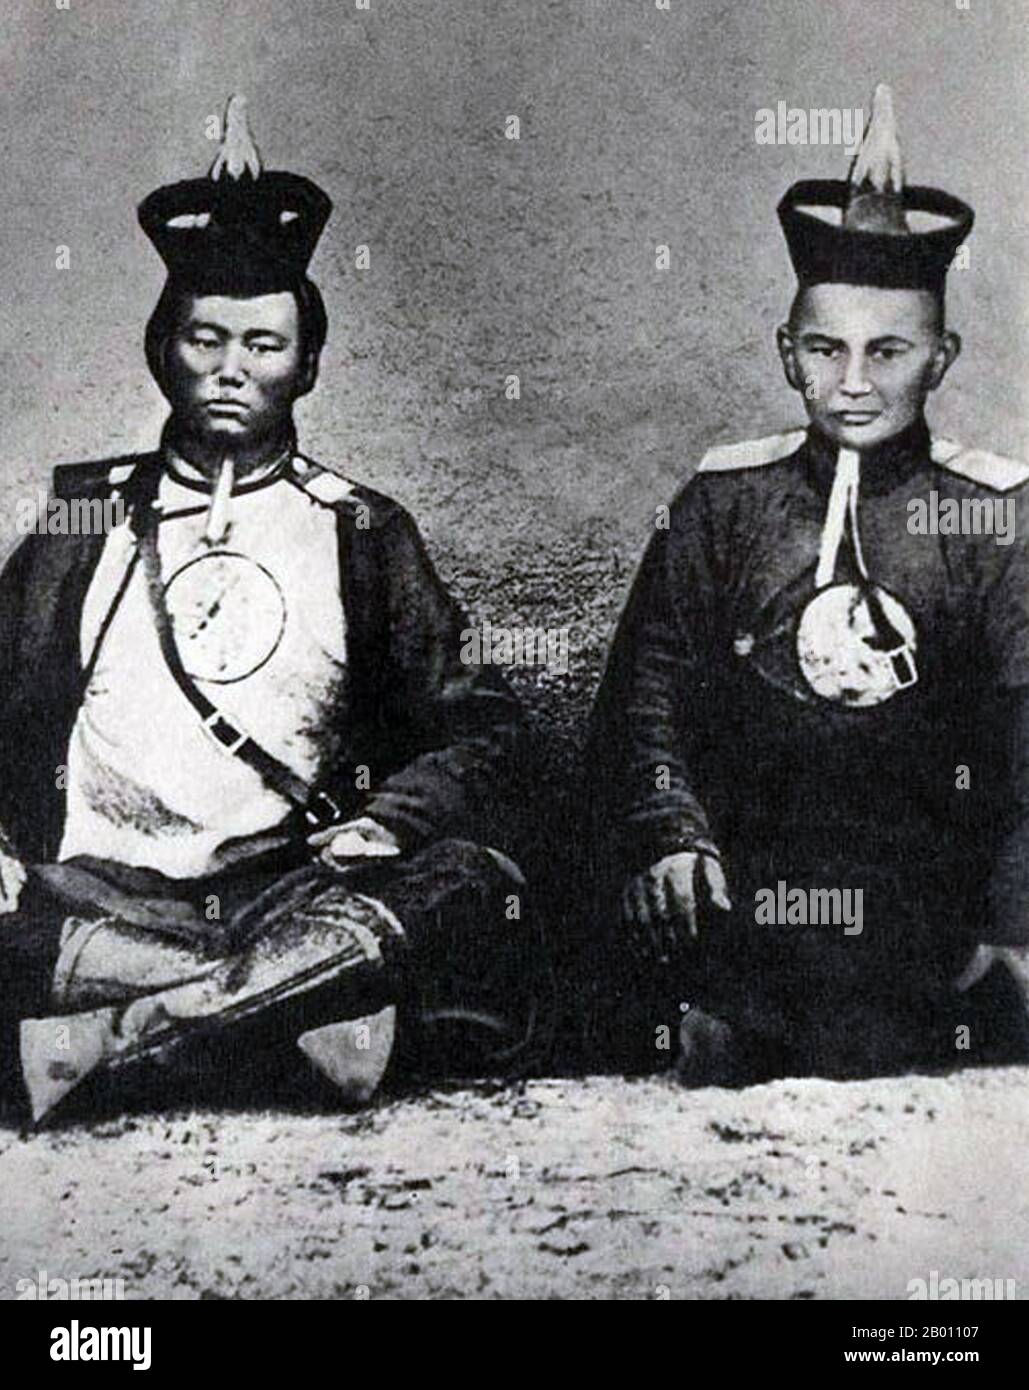 Mongolia: Damdin Sukhbaatar (left, 1893-1923) while serving in the army of the Mongolian Bogd Khan. Urga (Ulan Batyaar) 1916.  Damdin Sukhbaatar (February 2, 1893 - February 20, 1923) was a Mongolian military leader in the 1921 revolution. He is remembered as one of the most important figures in Mongolia's struggle for independence. Stock Photo